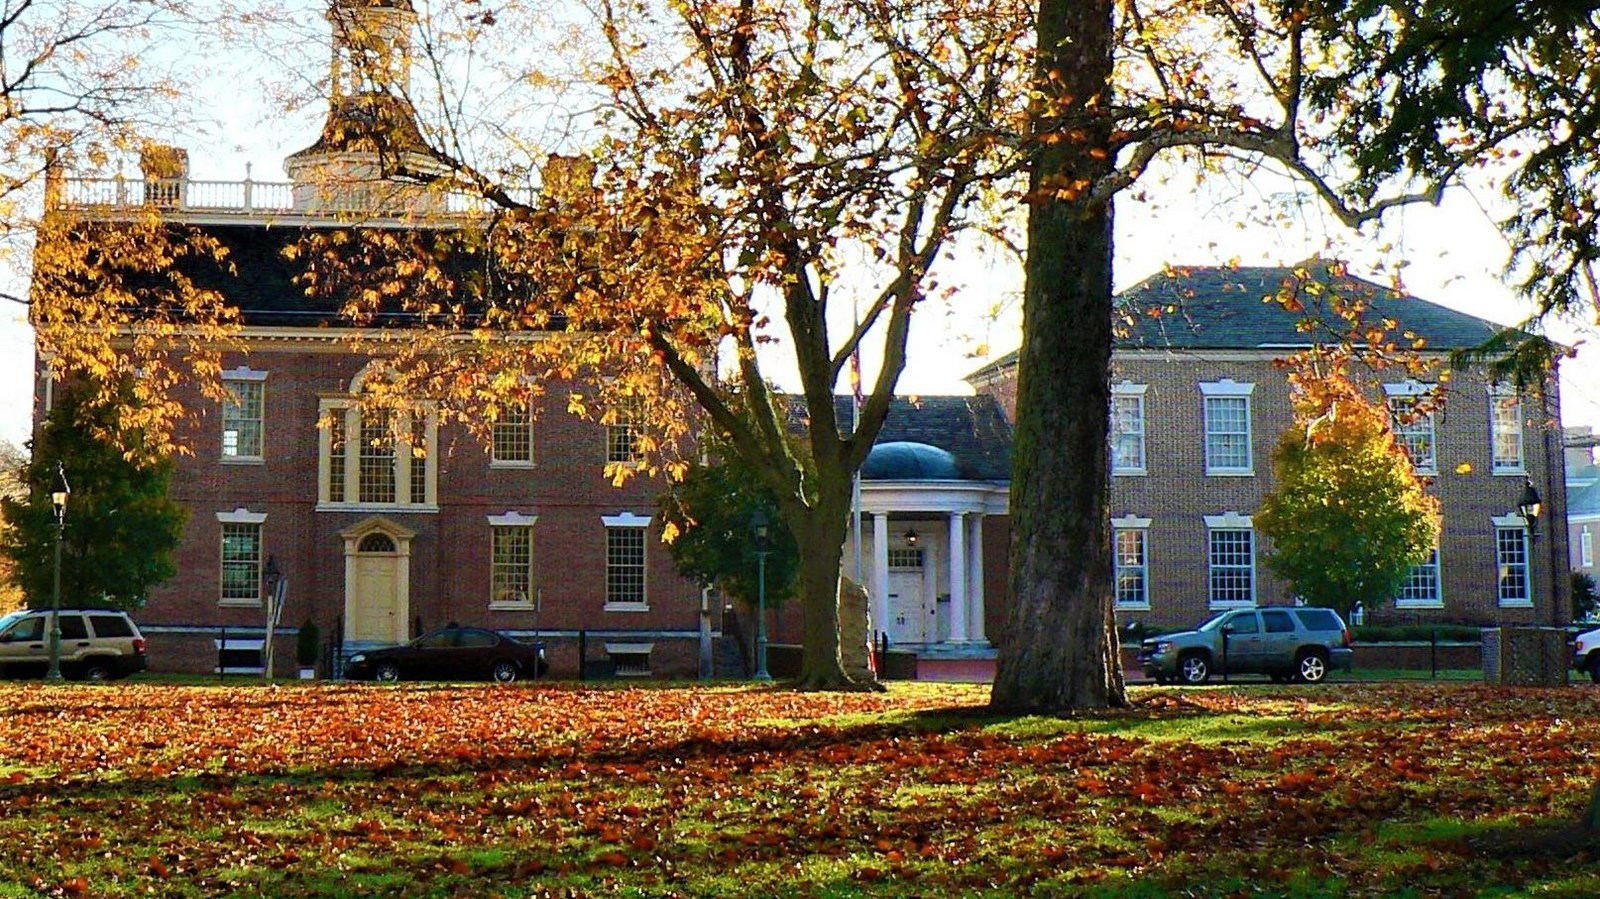 Vibrant yellow, orange and red leaves lay on the ground in front of a colonial court house. 